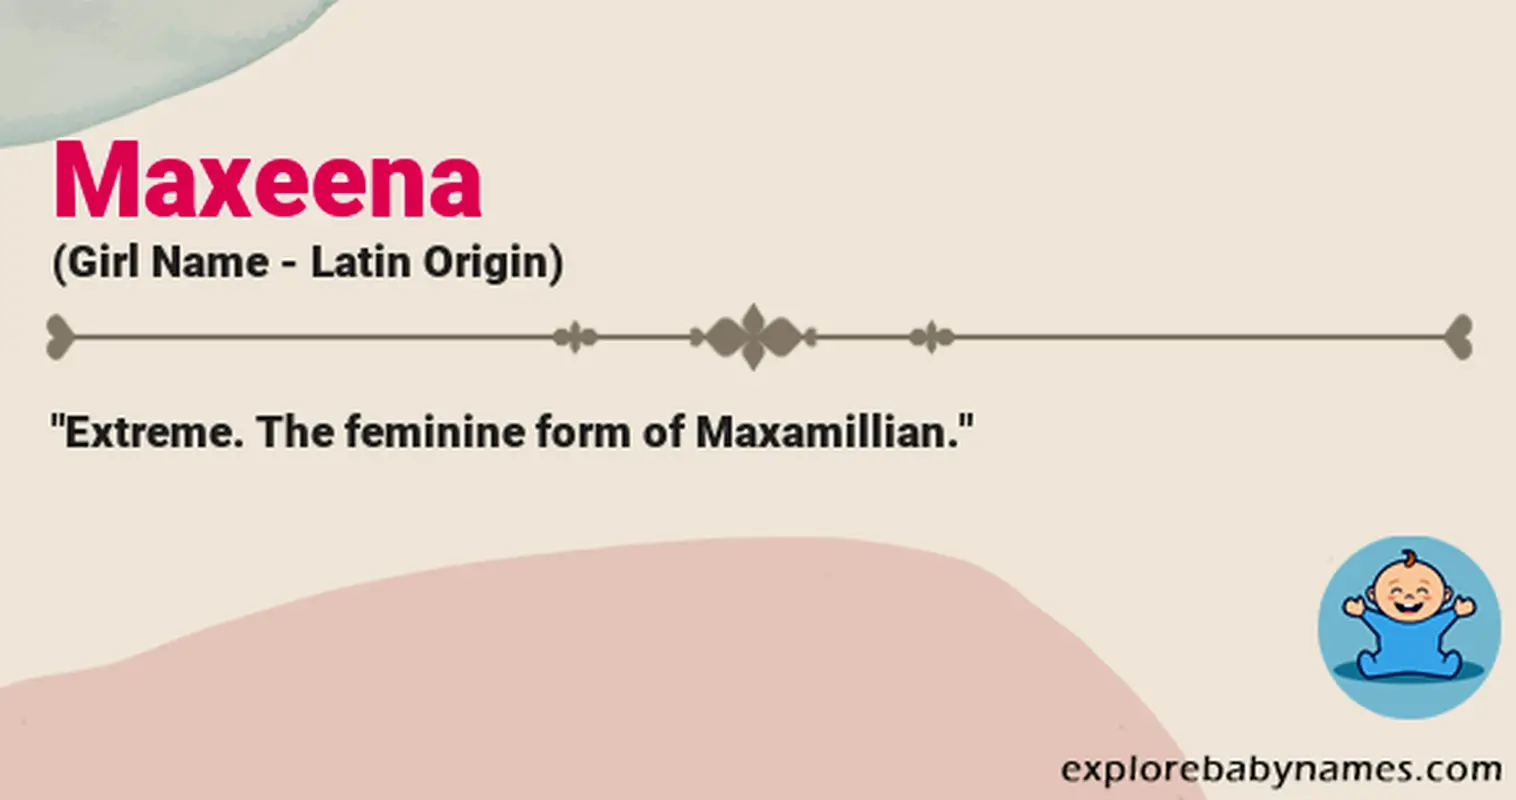 Meaning of Maxeena